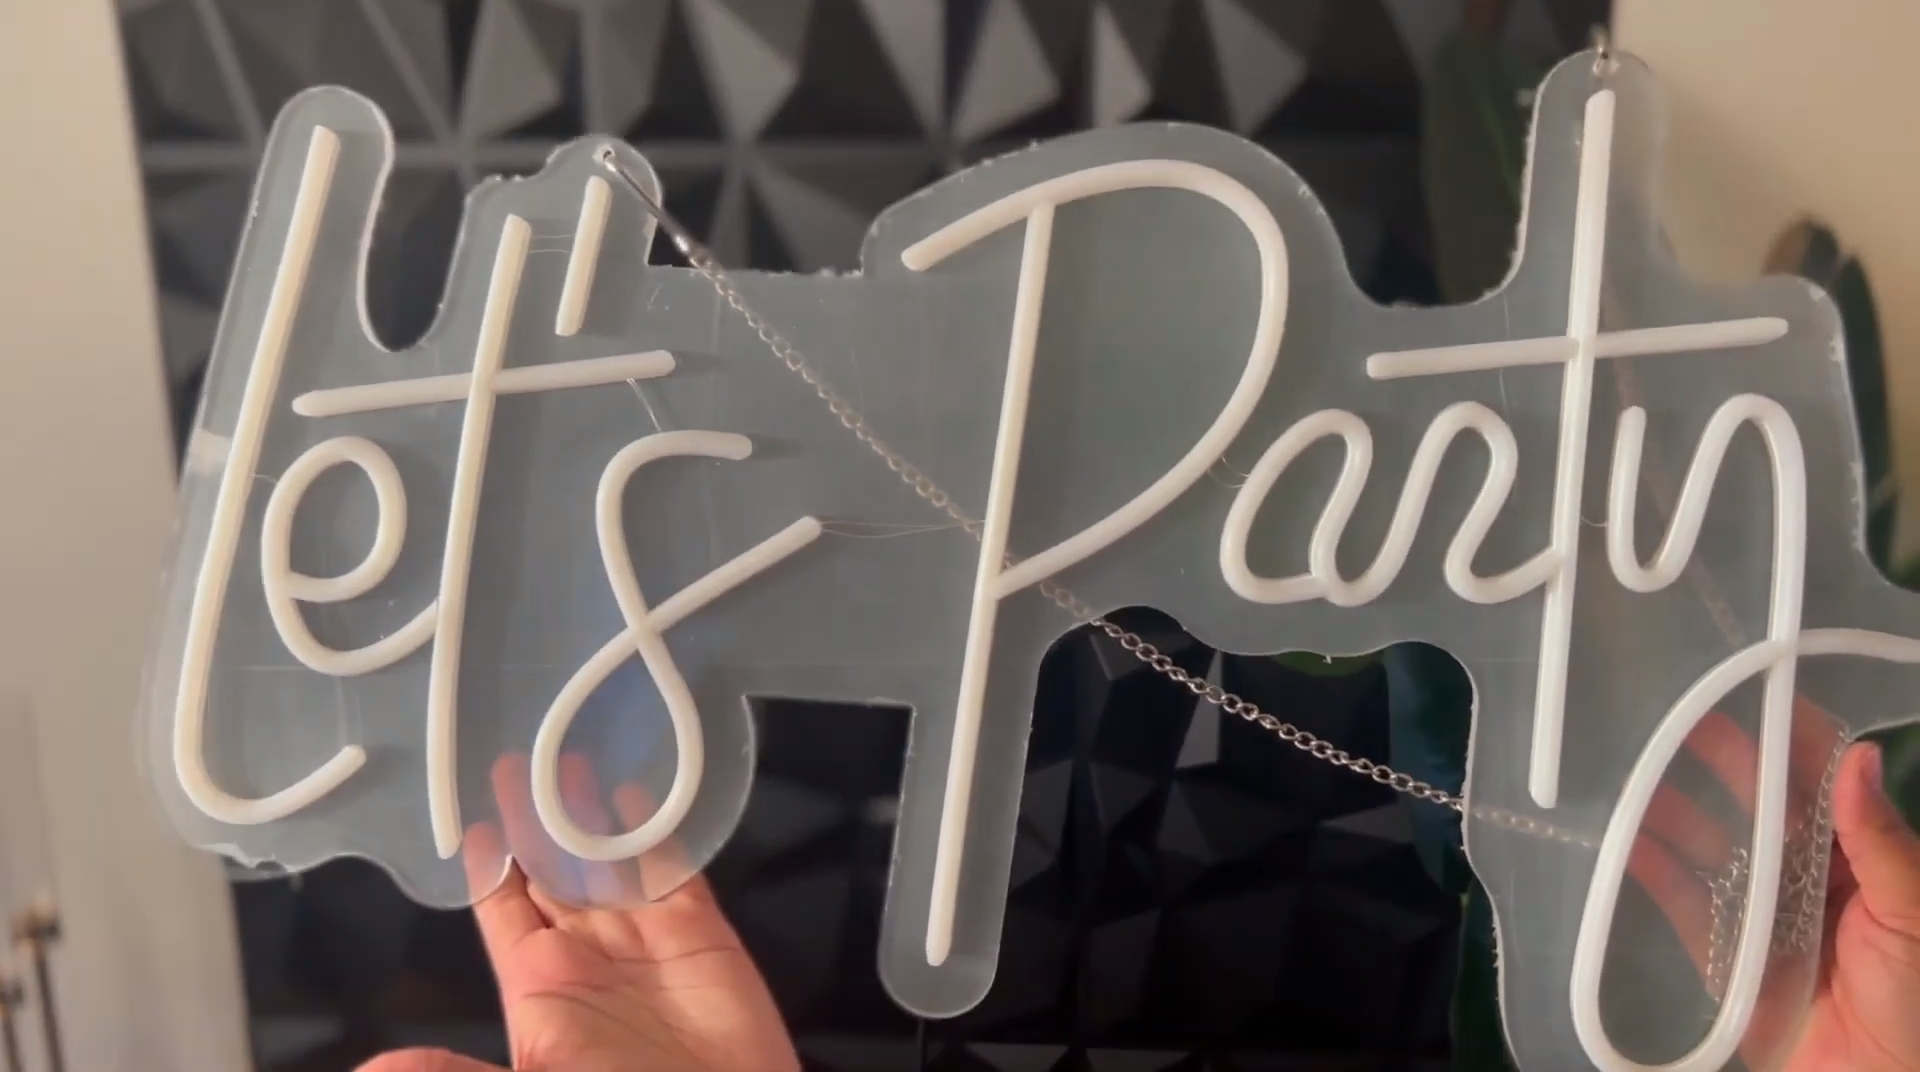 Let's Party neon light sign with 3D wall panel backdrop